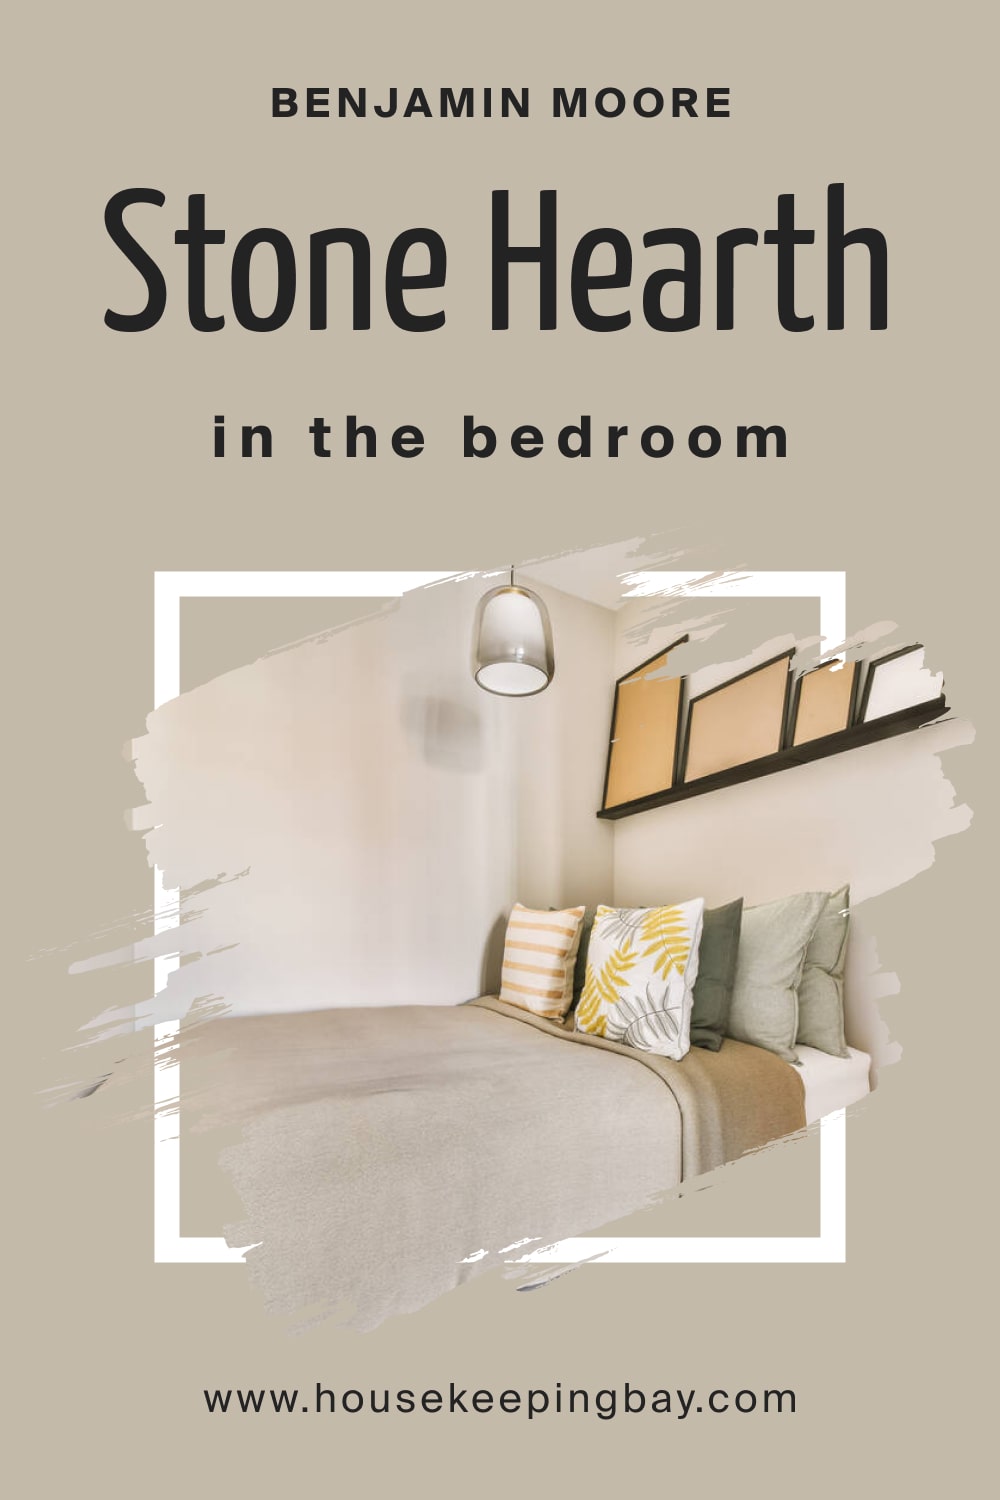 Stone Hearth 984 in a Bedroom